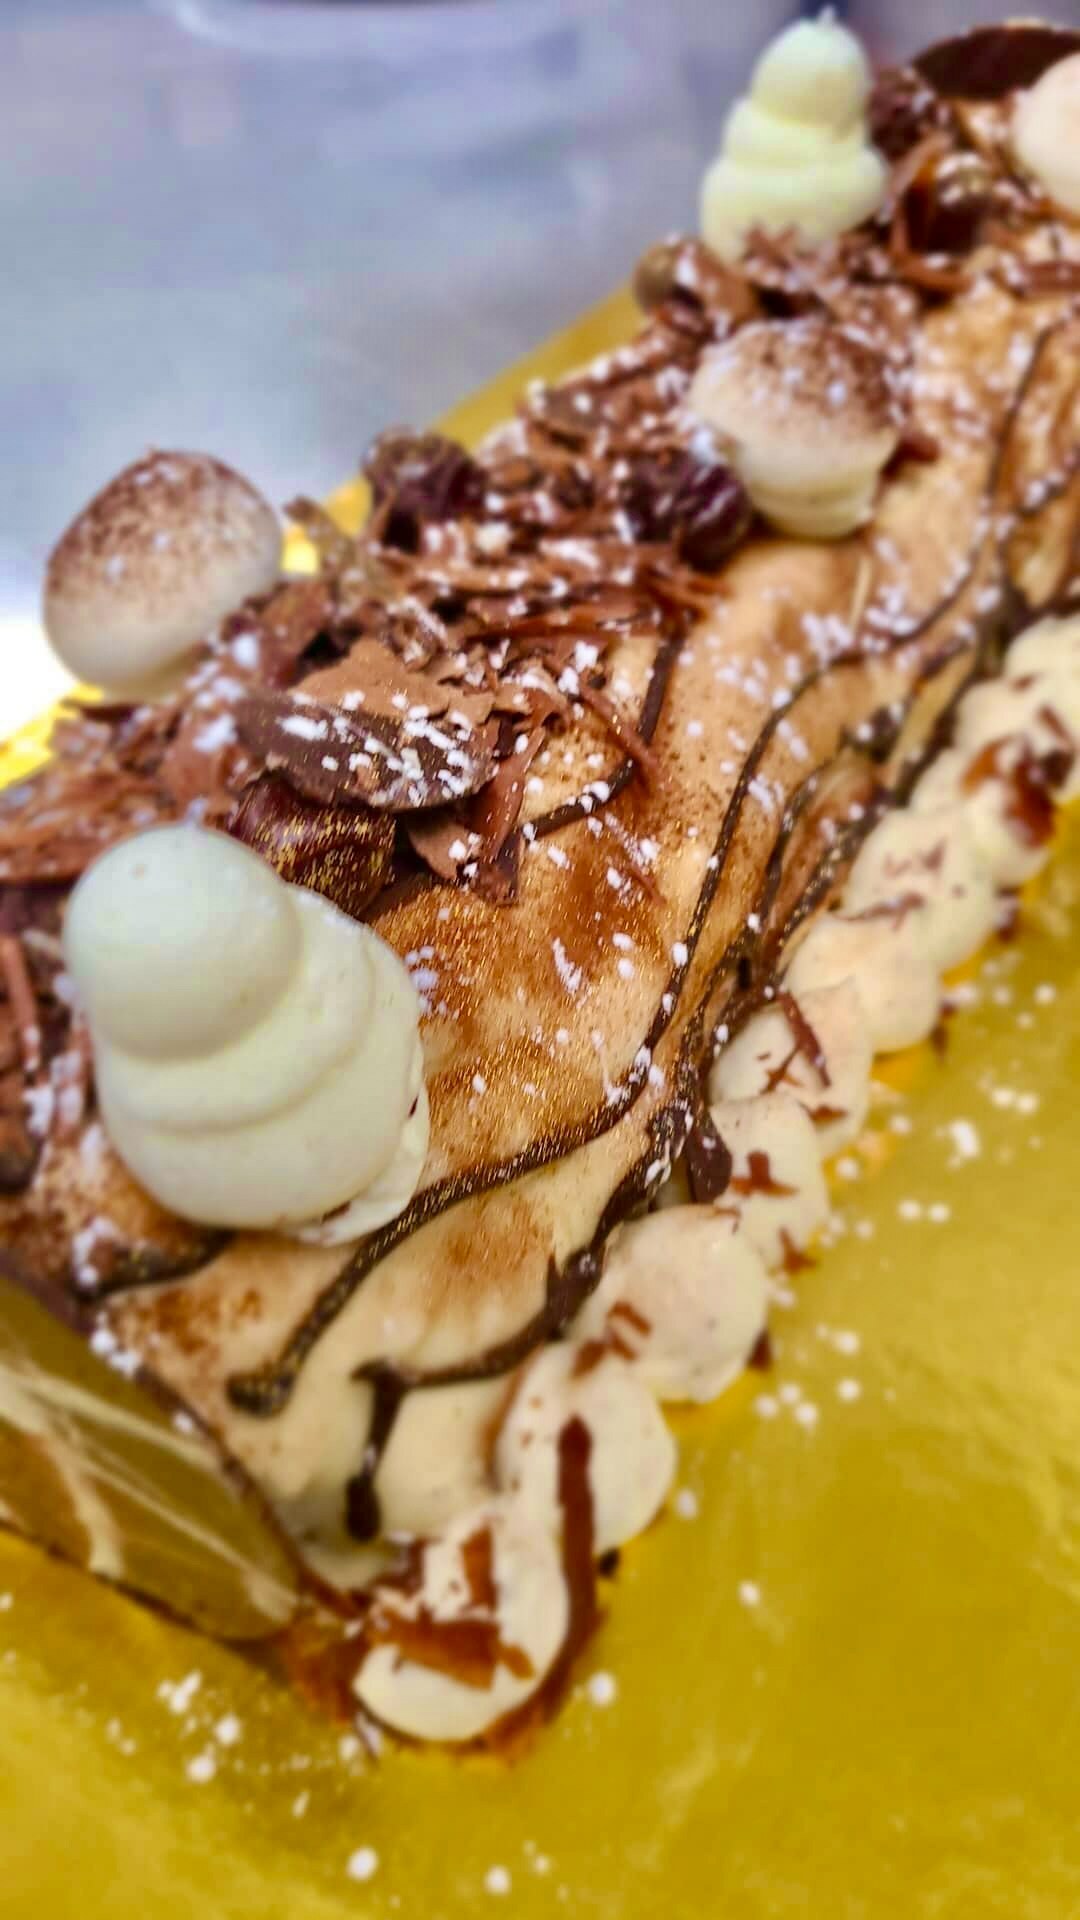 Lulu Kitchen & Bar's house-made Bûche de Noël cake is available for the holiday. CARL TIMPONE